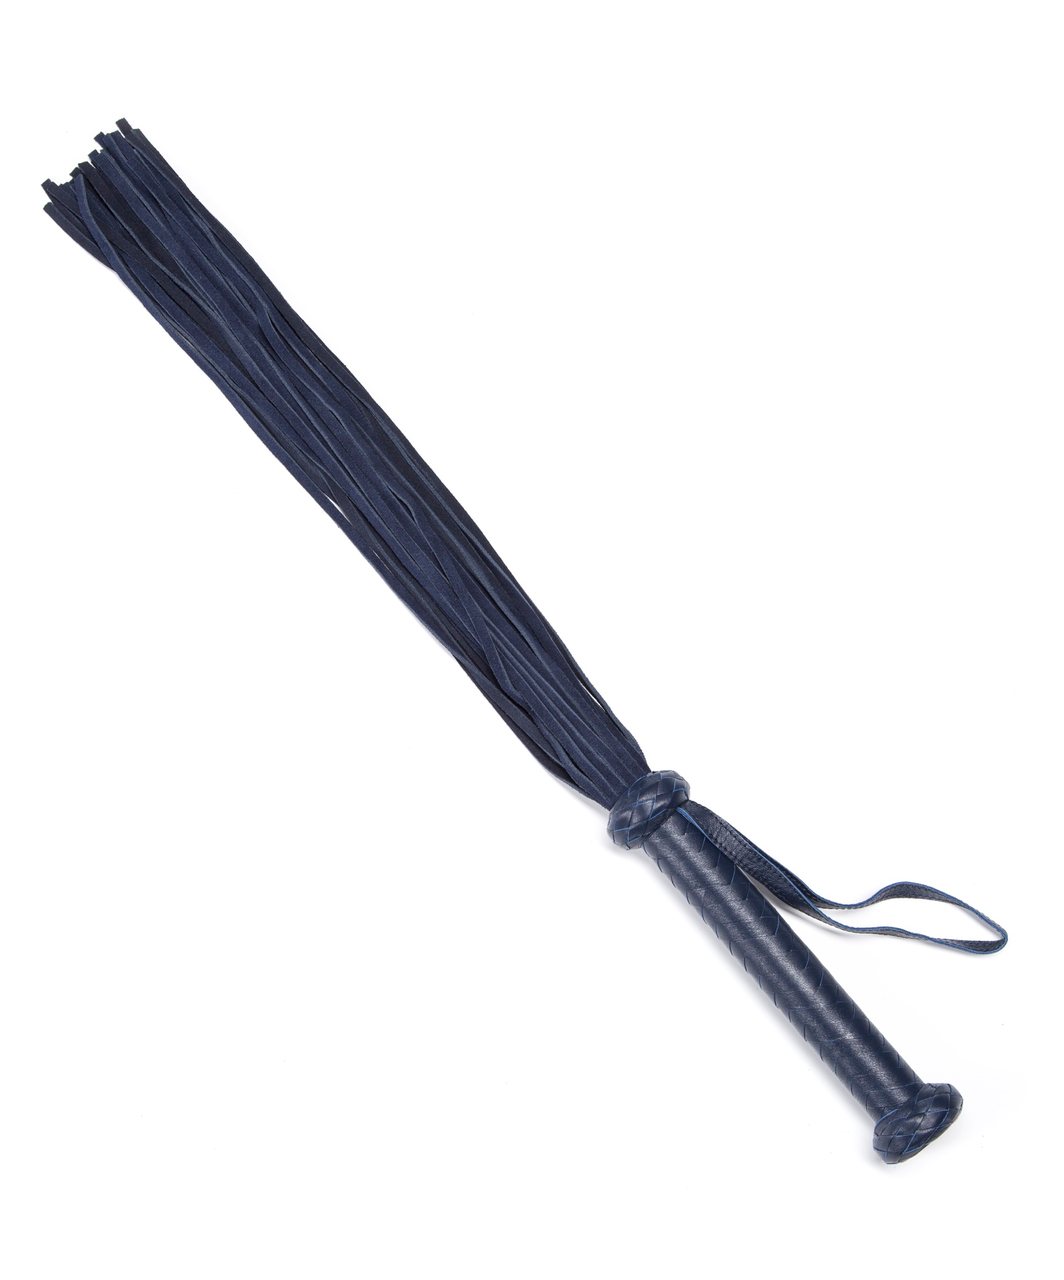 Fifty Shades of Grey Darker Collection flogger